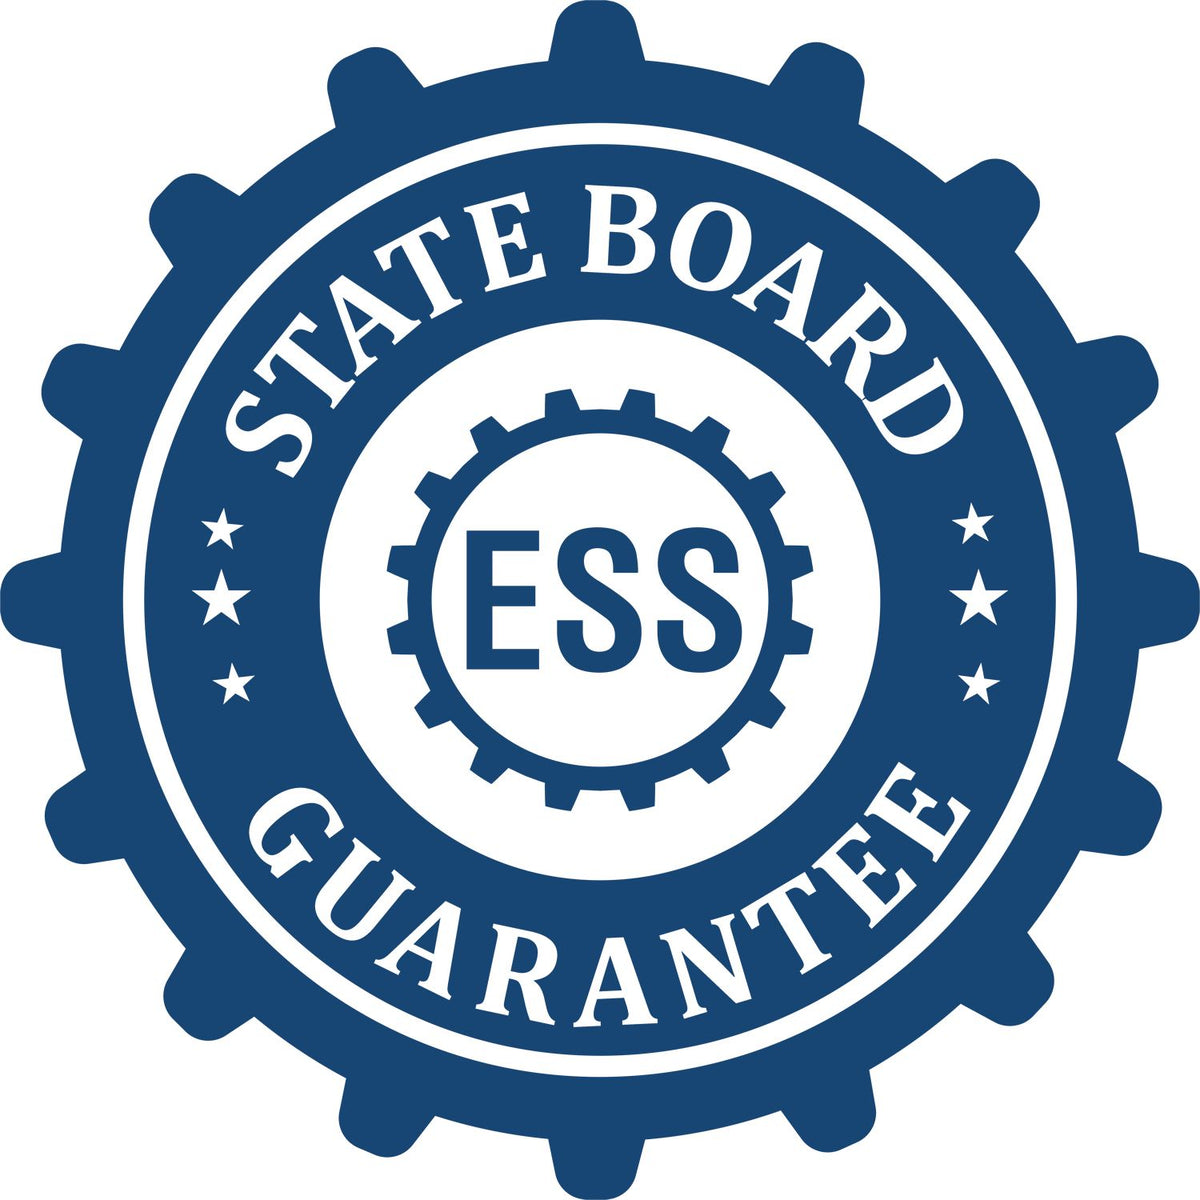 An emblem in a gear shape illustrating a state board guarantee for the State of Connecticut Long Reach Architectural Embossing Seal product.